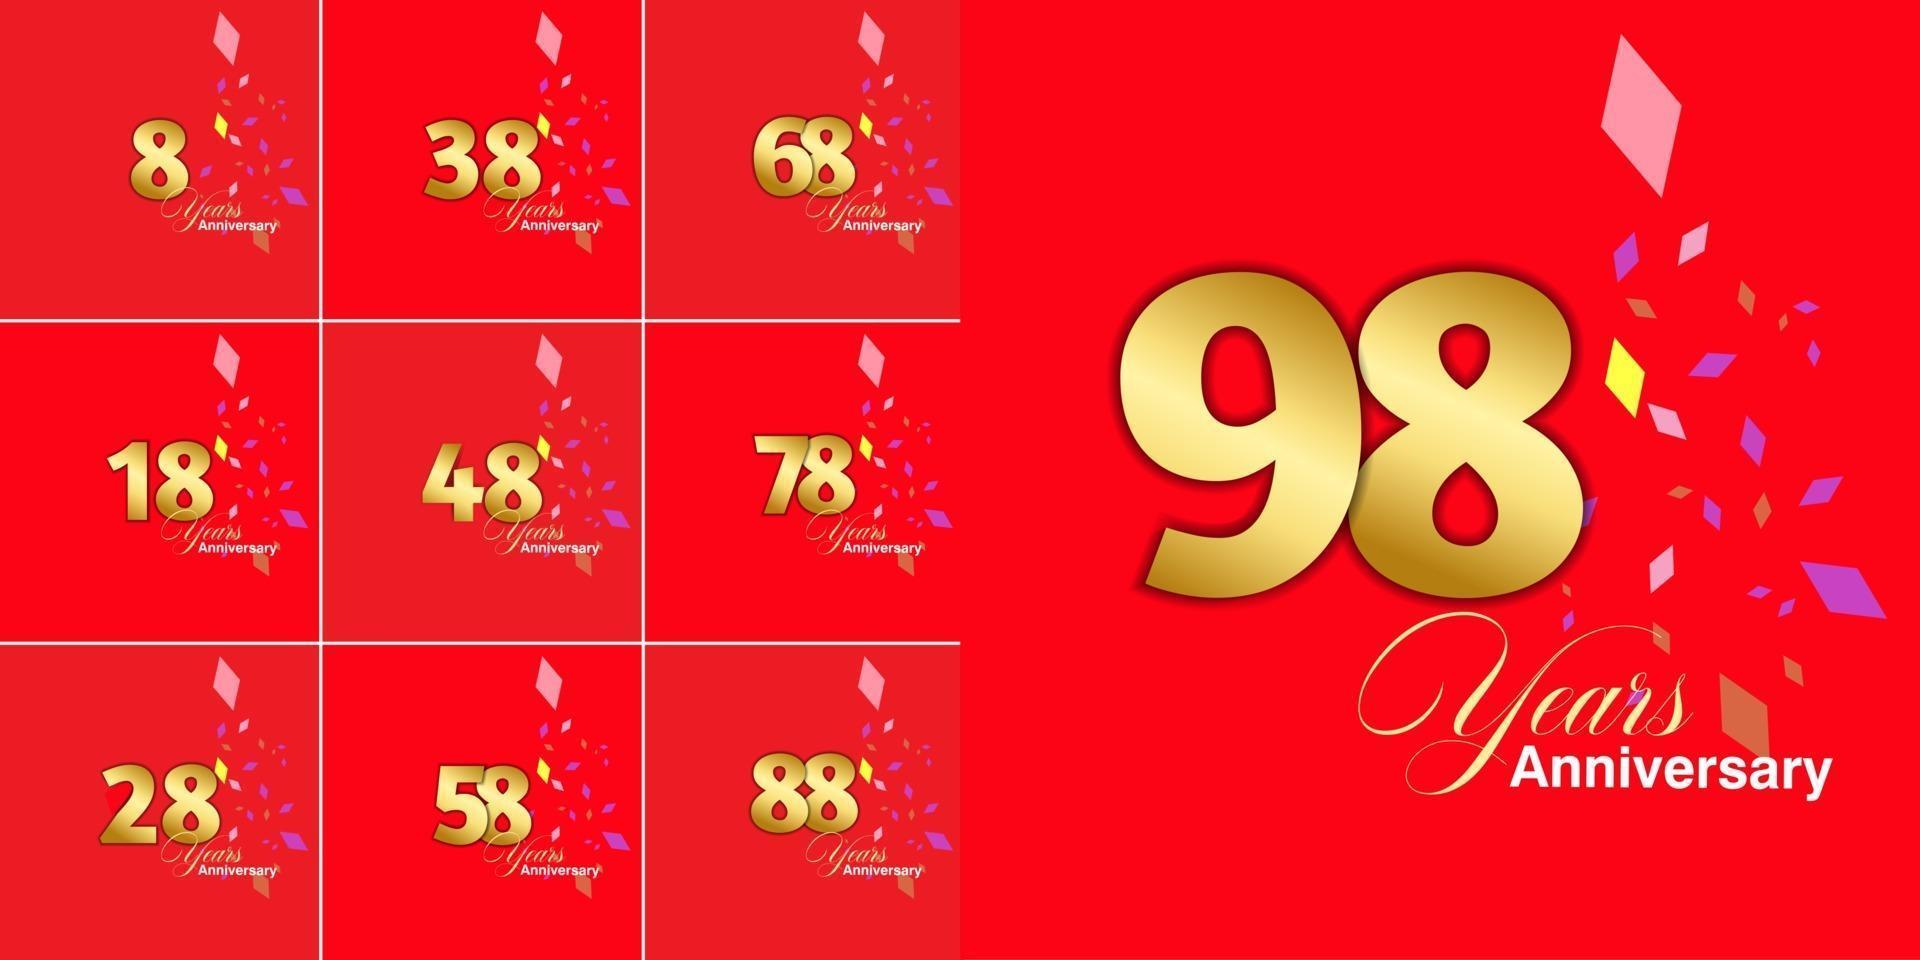 set 8, 18, 28, 38, 48, 58, 68, 78, 88, 98  Year Anniversary celebration numbers set vector